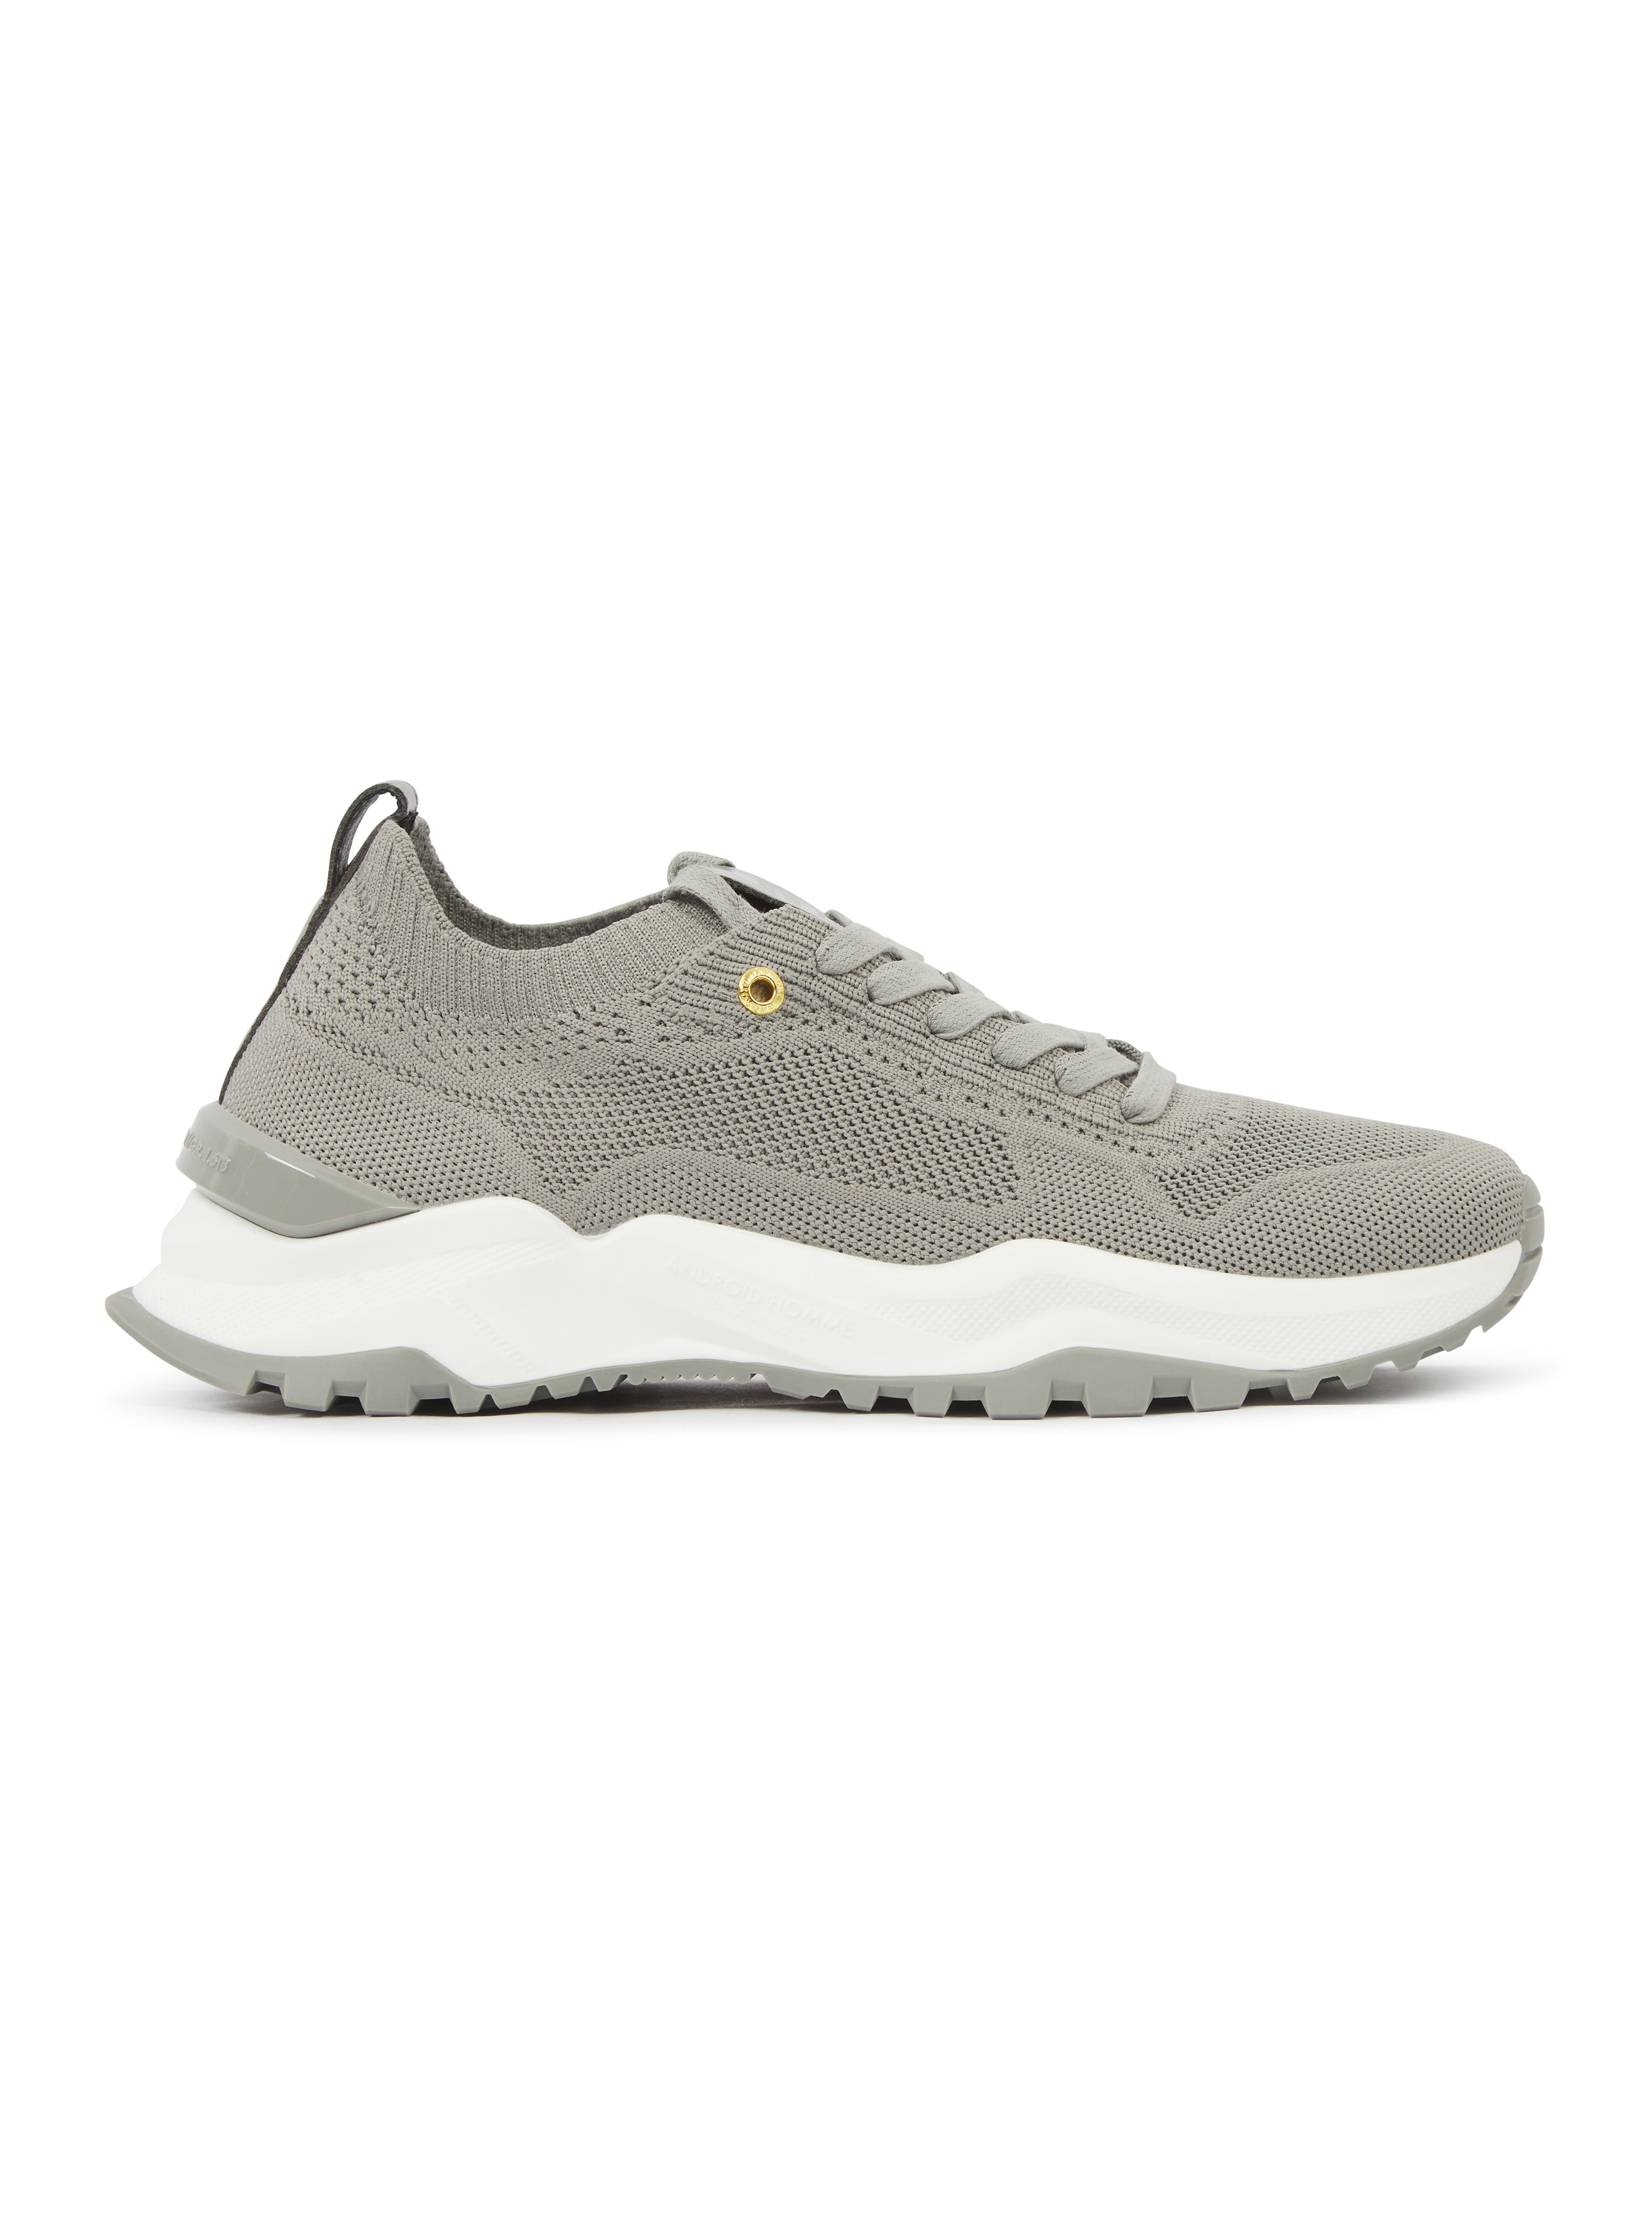 Load image into Gallery viewer, Android Homme Leo Carillo Grey Knit Trainer
